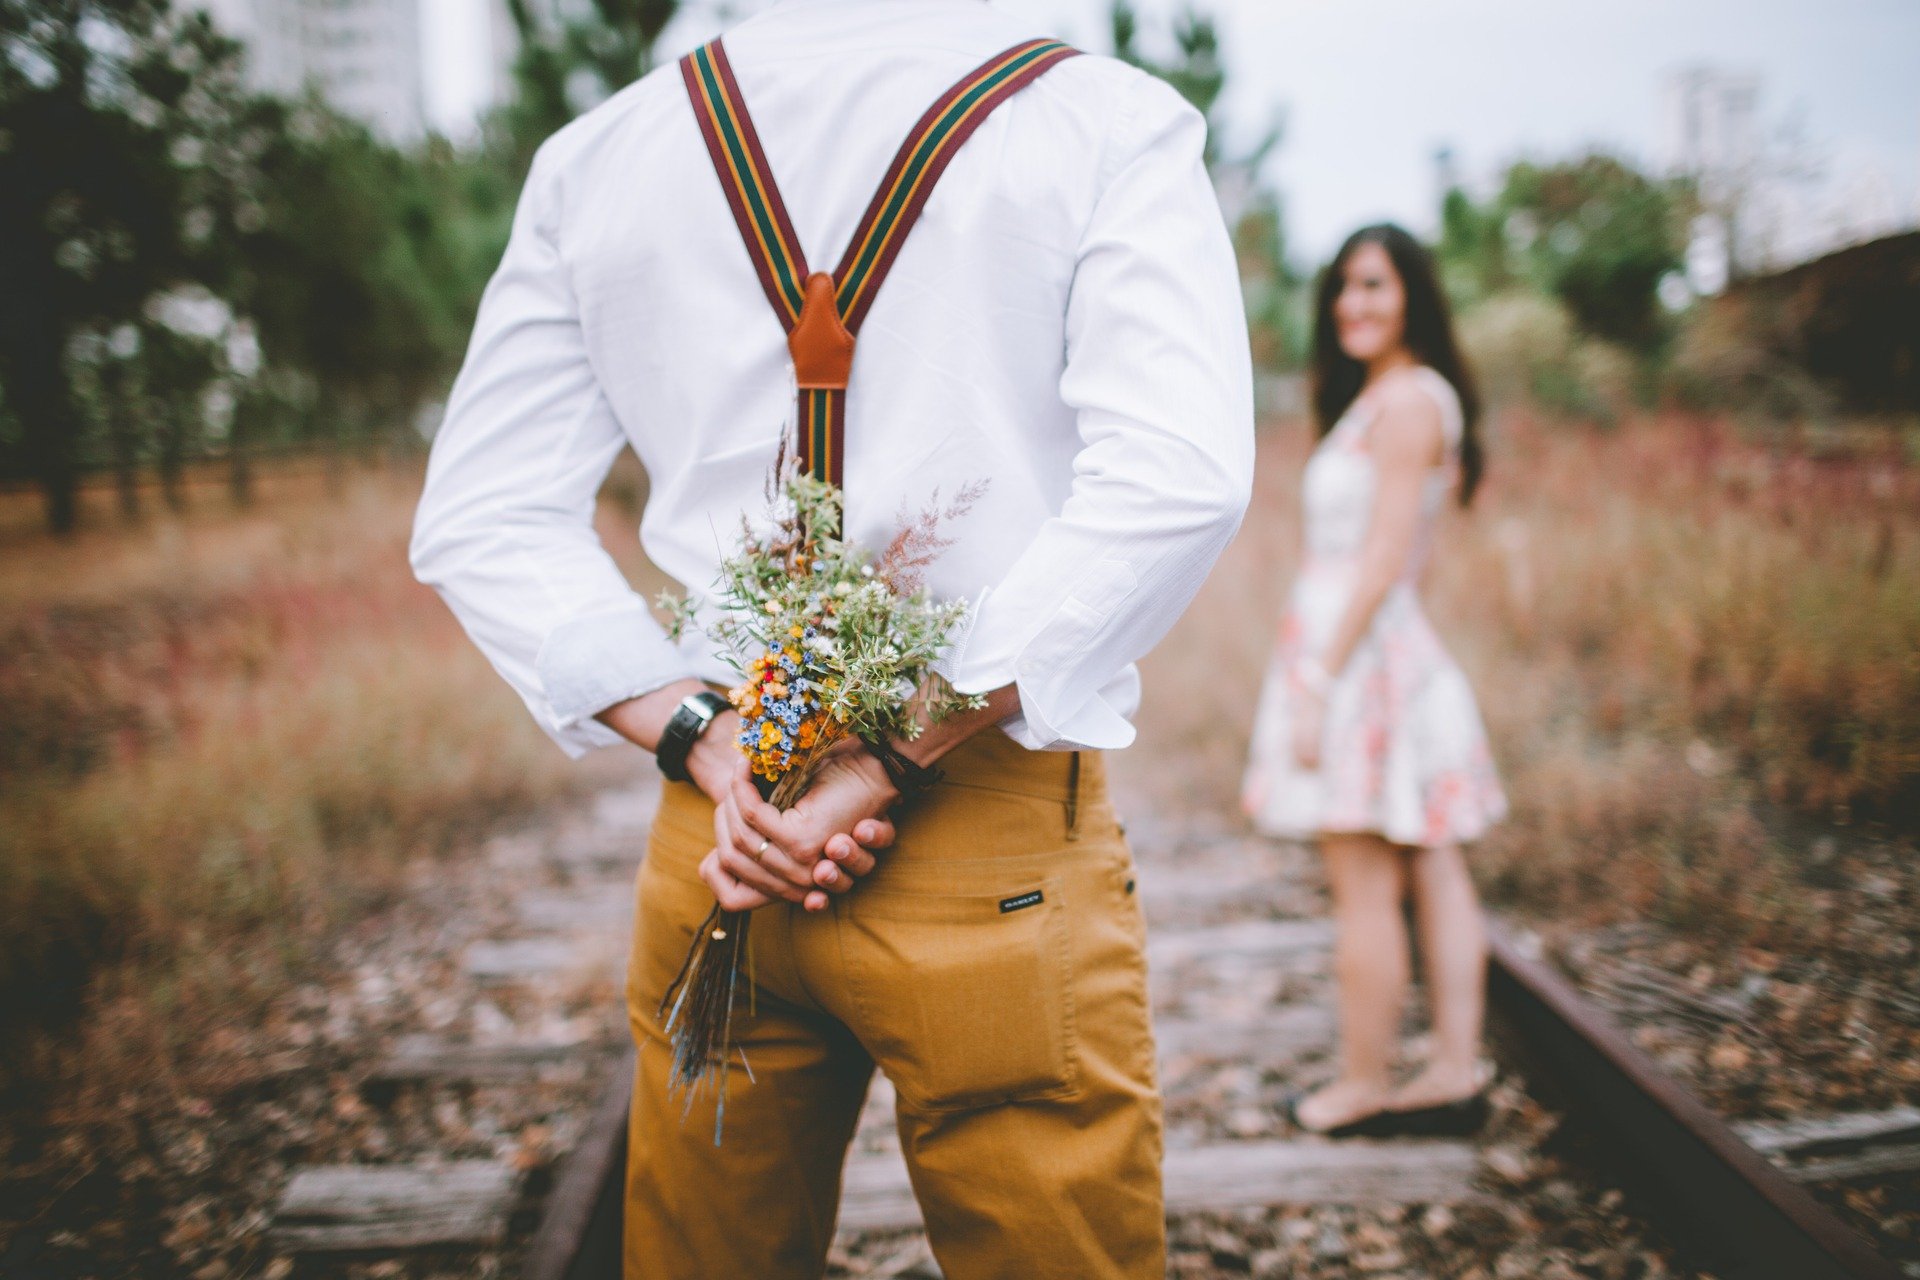 Man holding bouquet of flowers hidden behind his back, woman looking at him ahead.